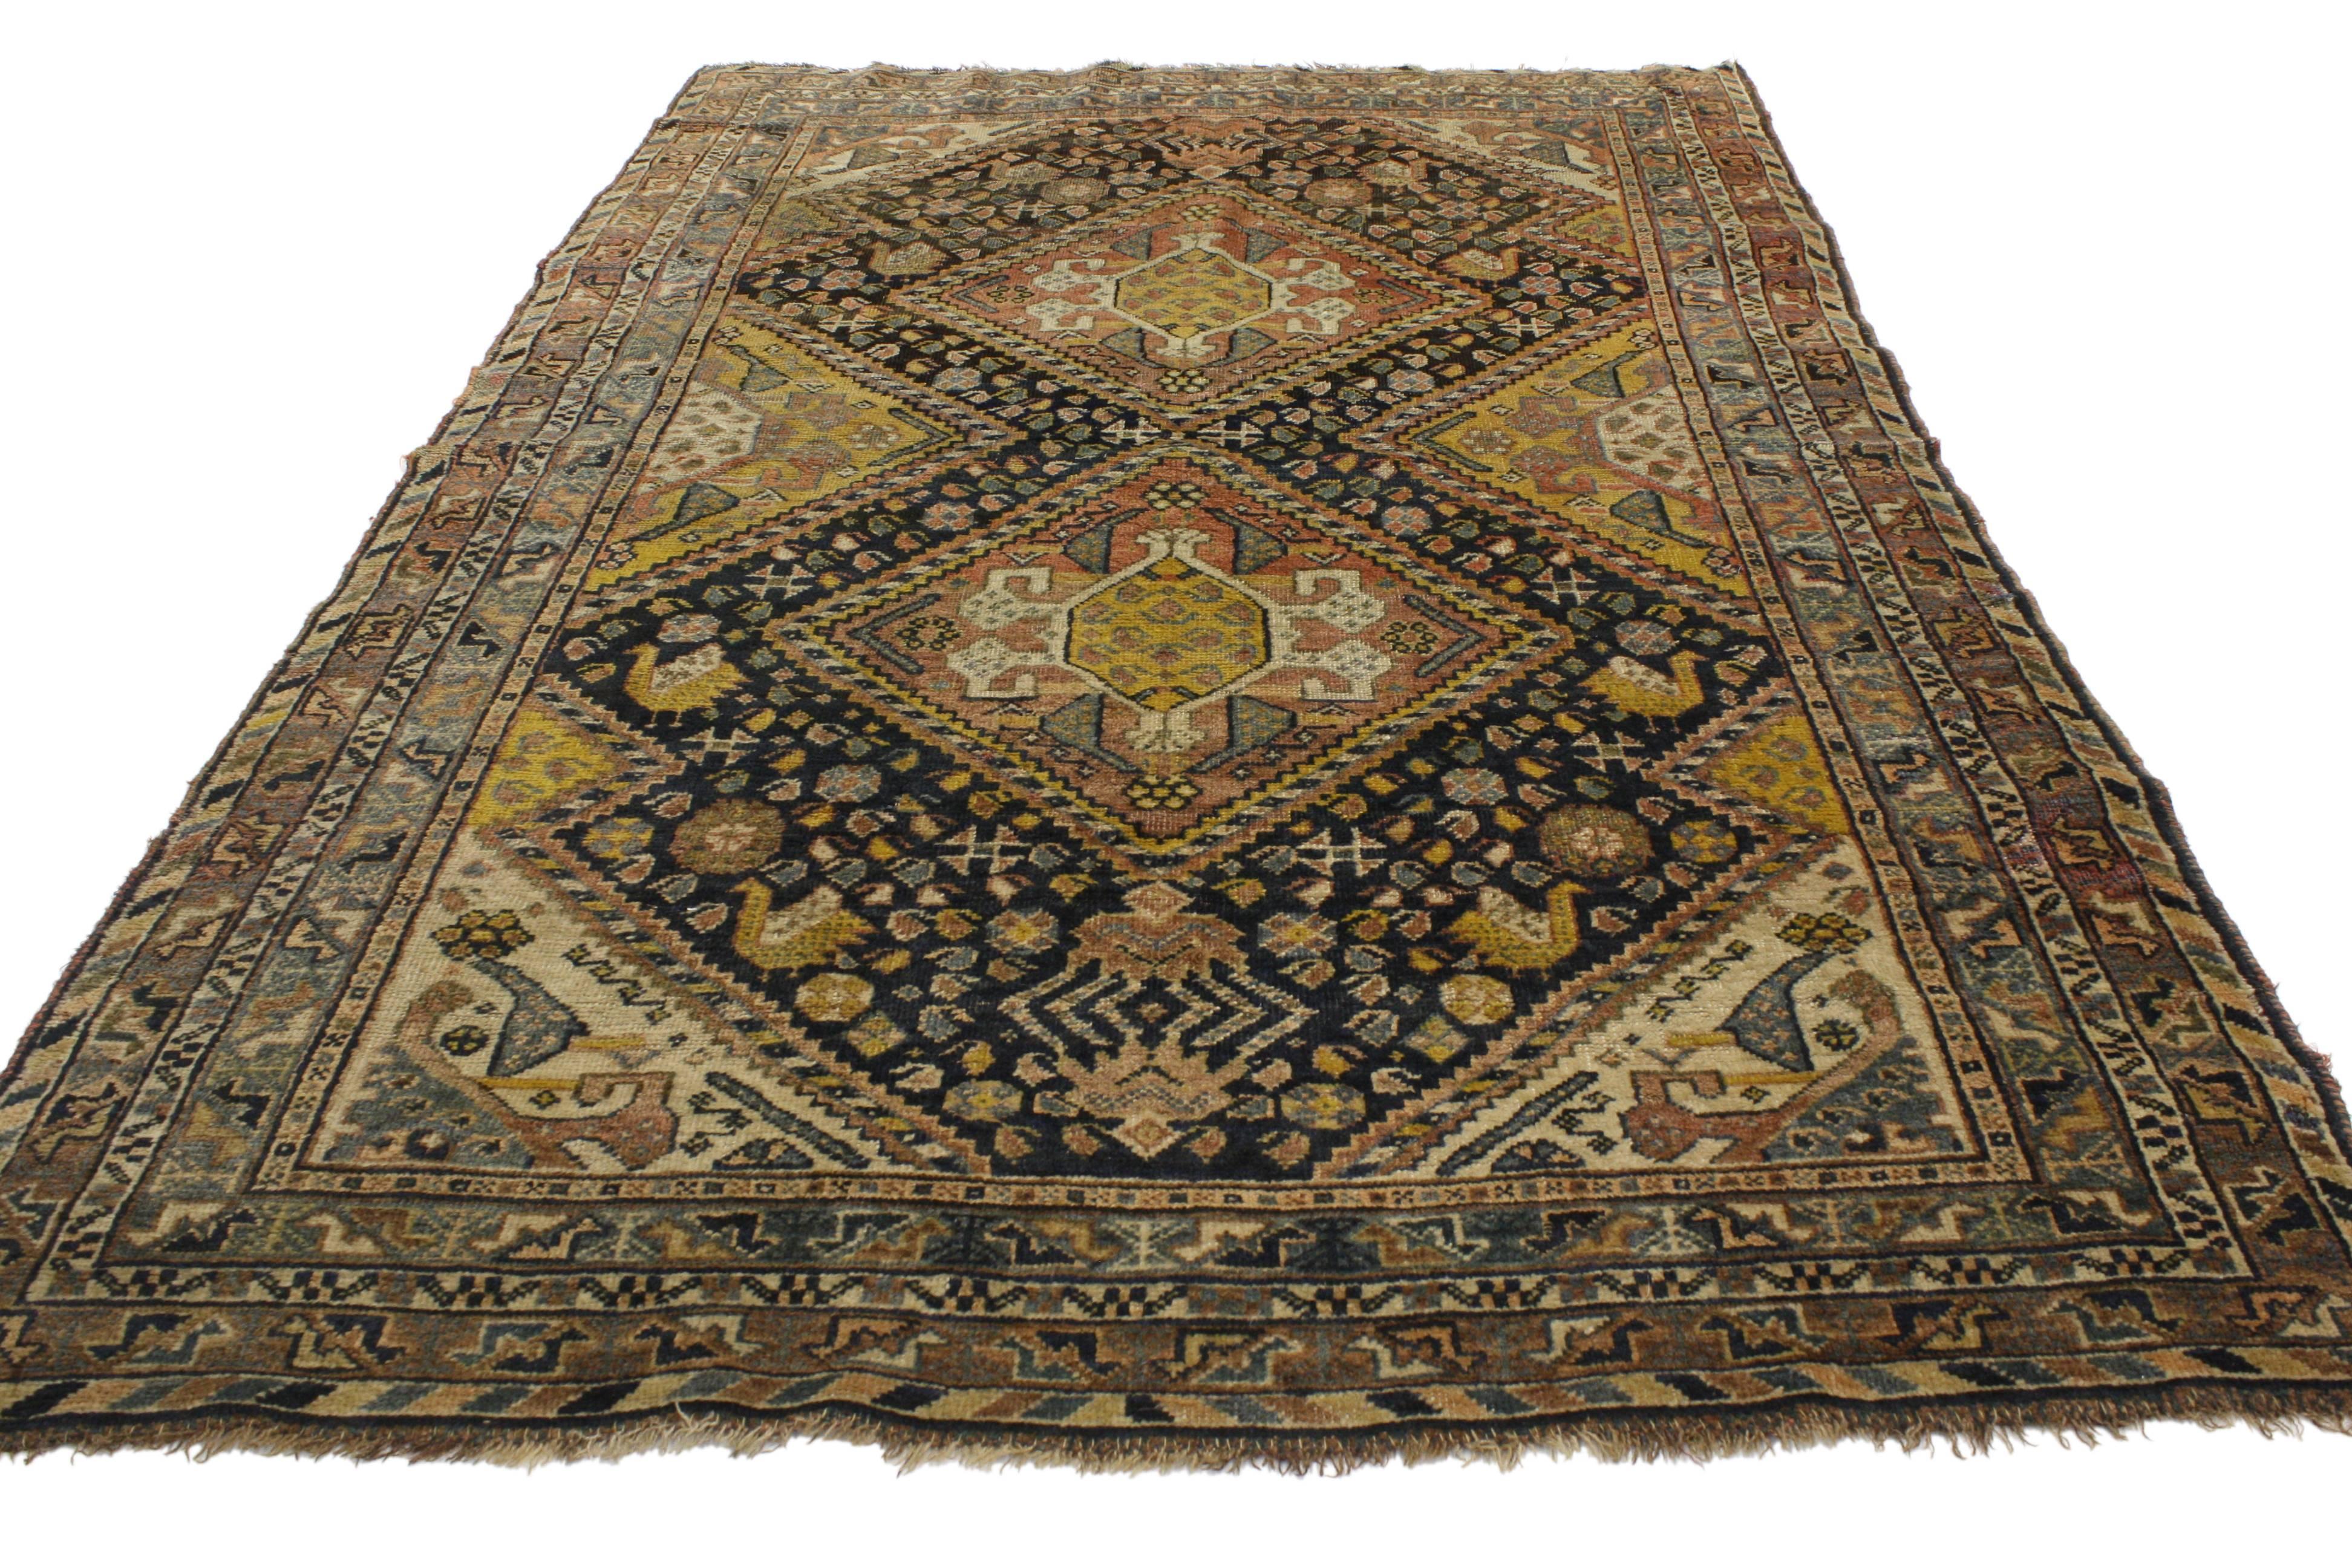 Malayer Antique Shiraz Persian Rug with Modern Tribal Style